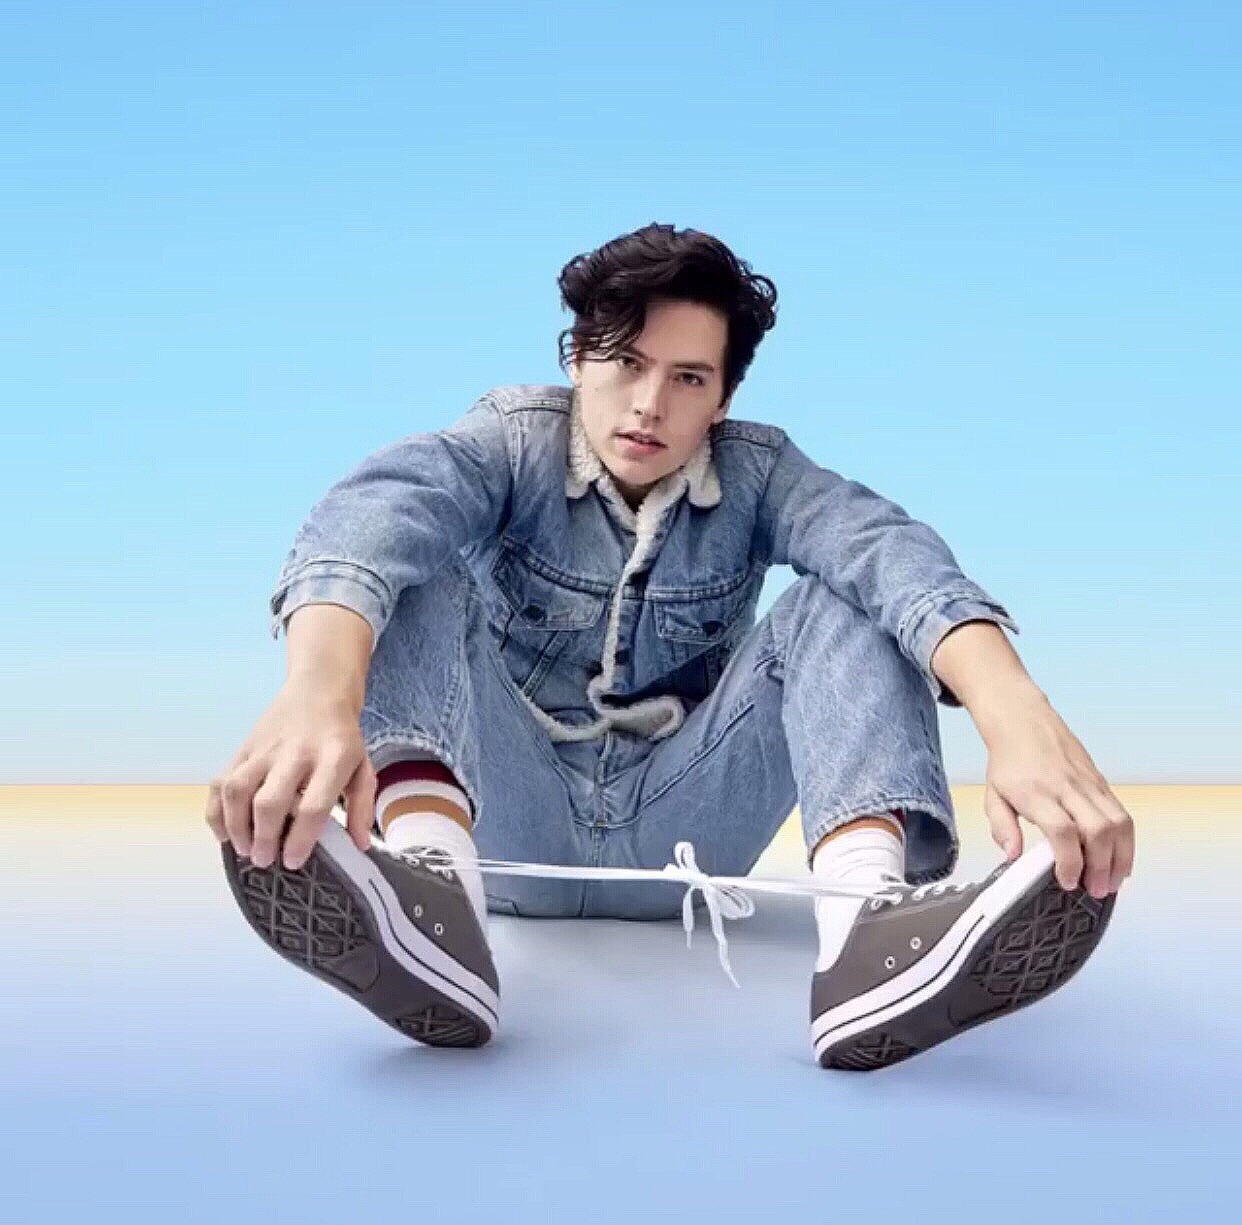 The Boy — Cole for Converse